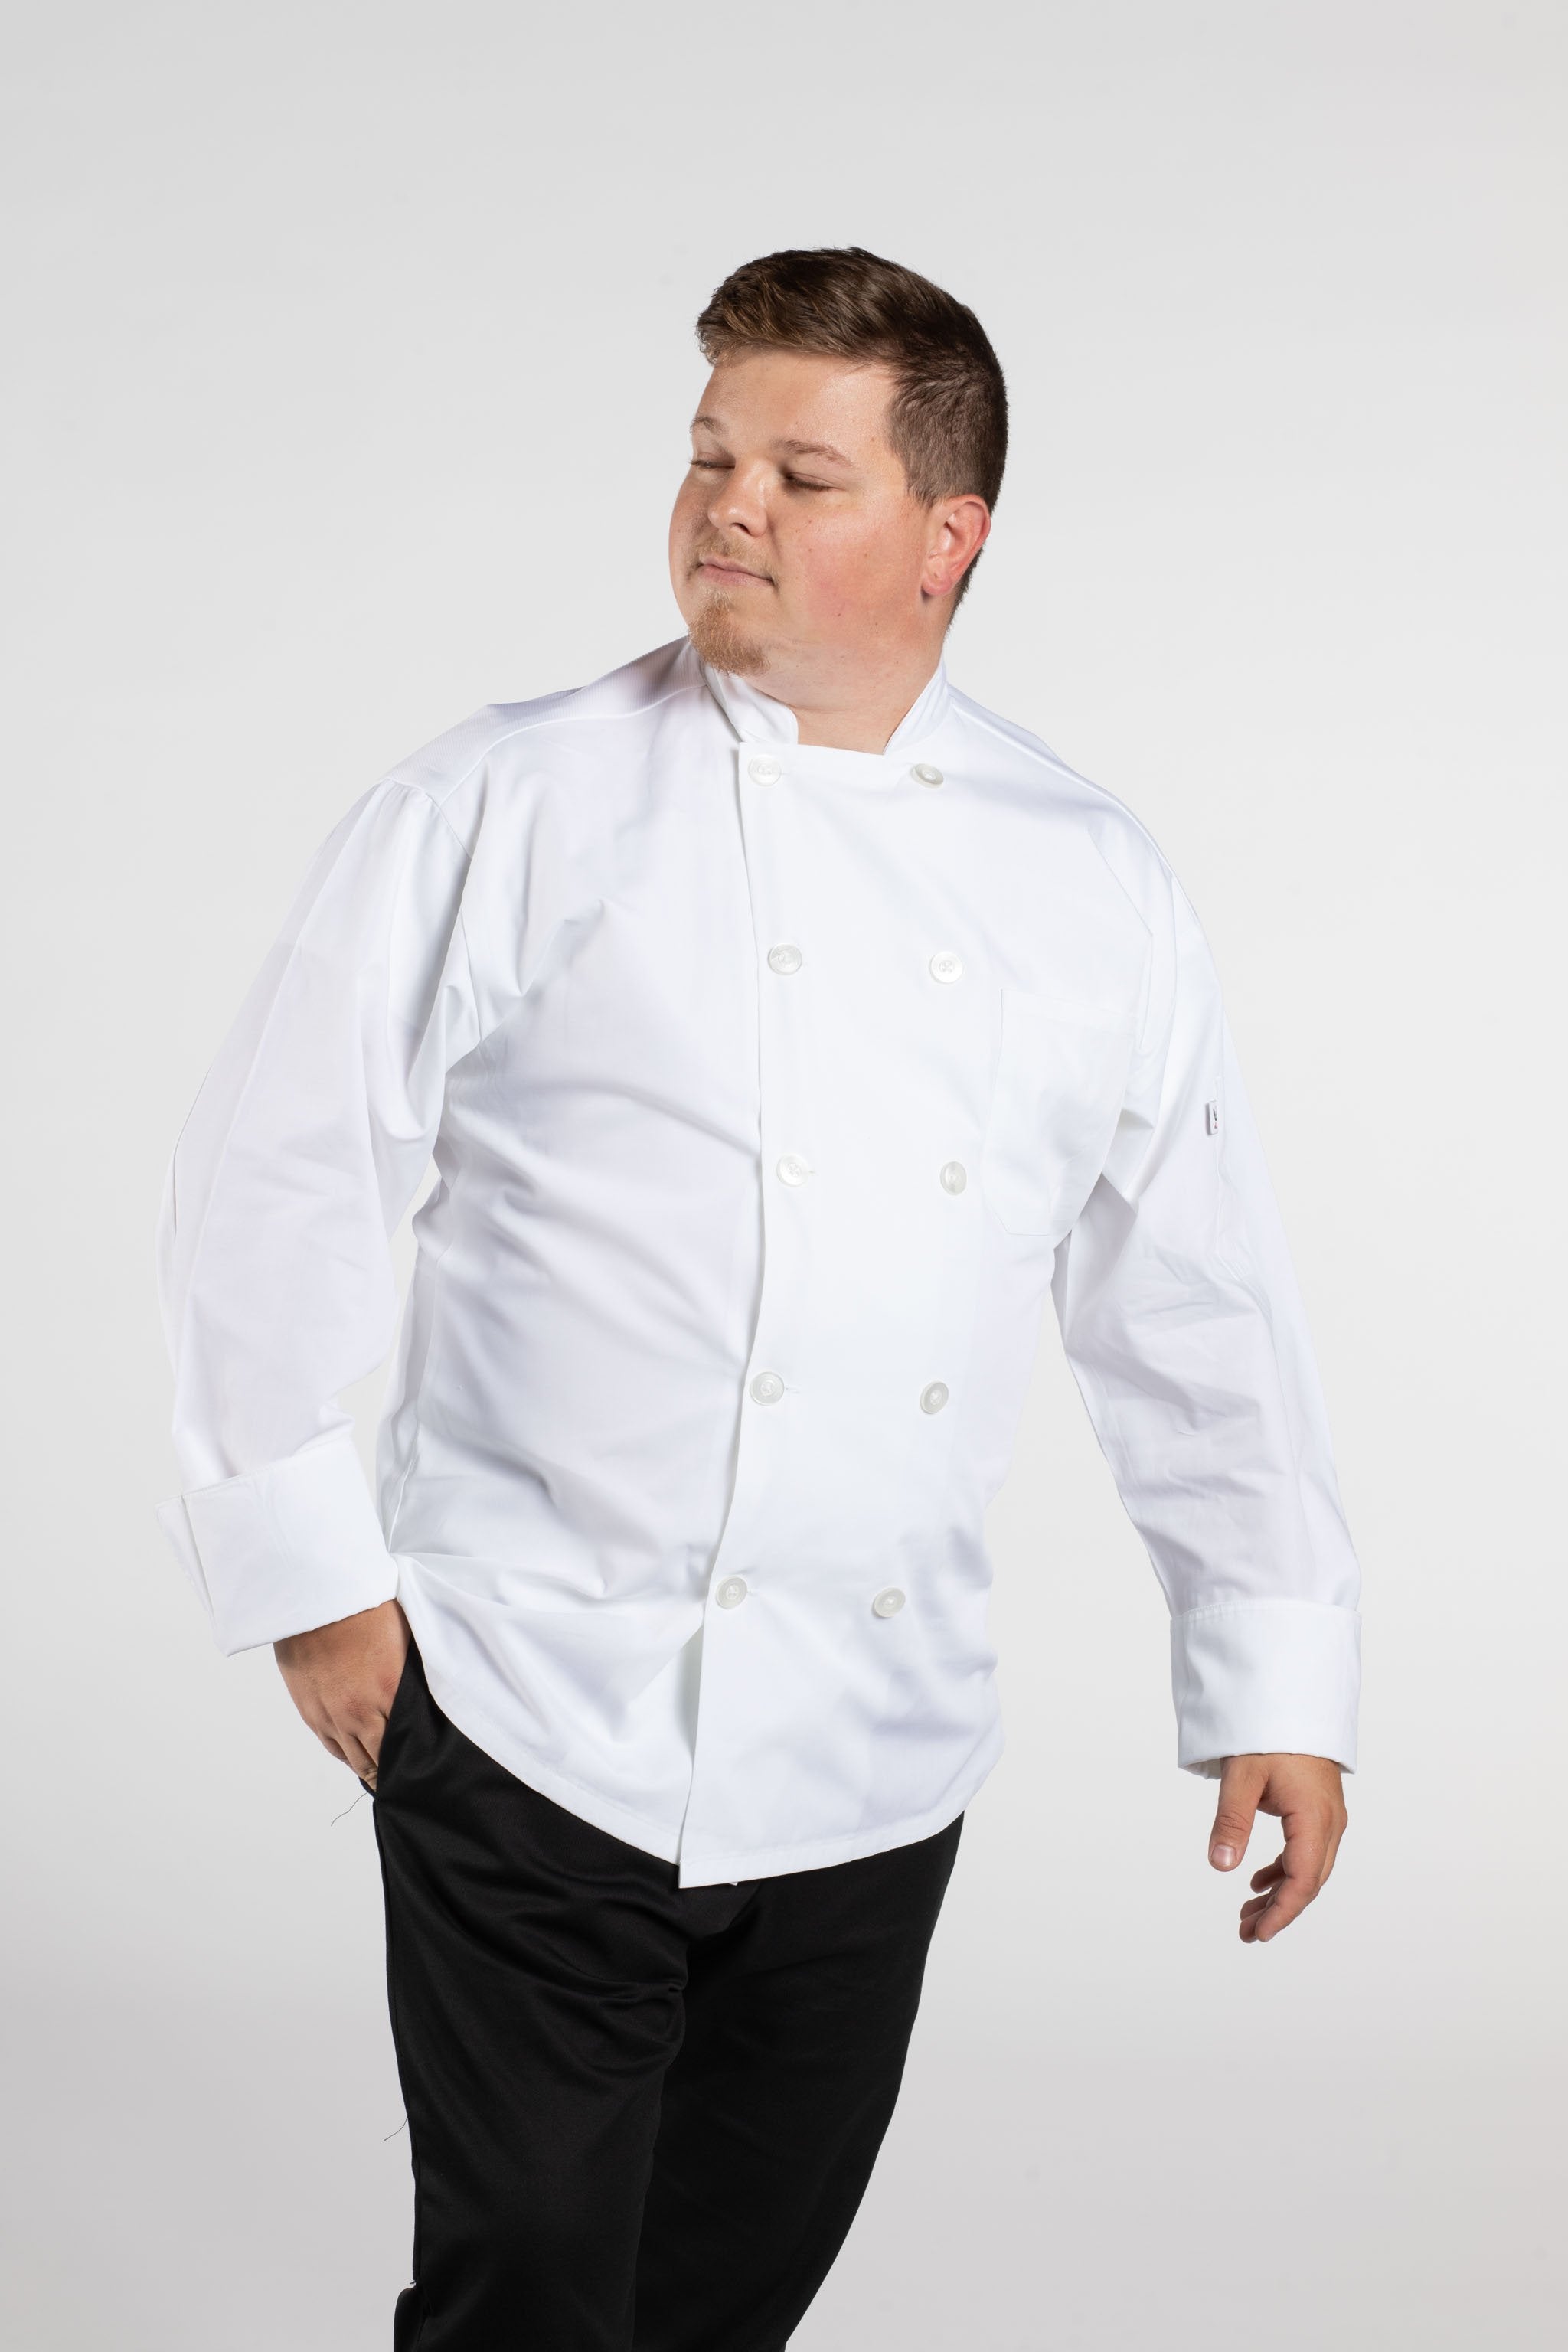 Amazon.com: Nsteky Custom Chef Coat Men's Long Sleeve Classic Chef Jacket  Hotel Kitchen Restaurant Chef Uniform with Double Breasted: Clothing, Shoes  & Jewelry